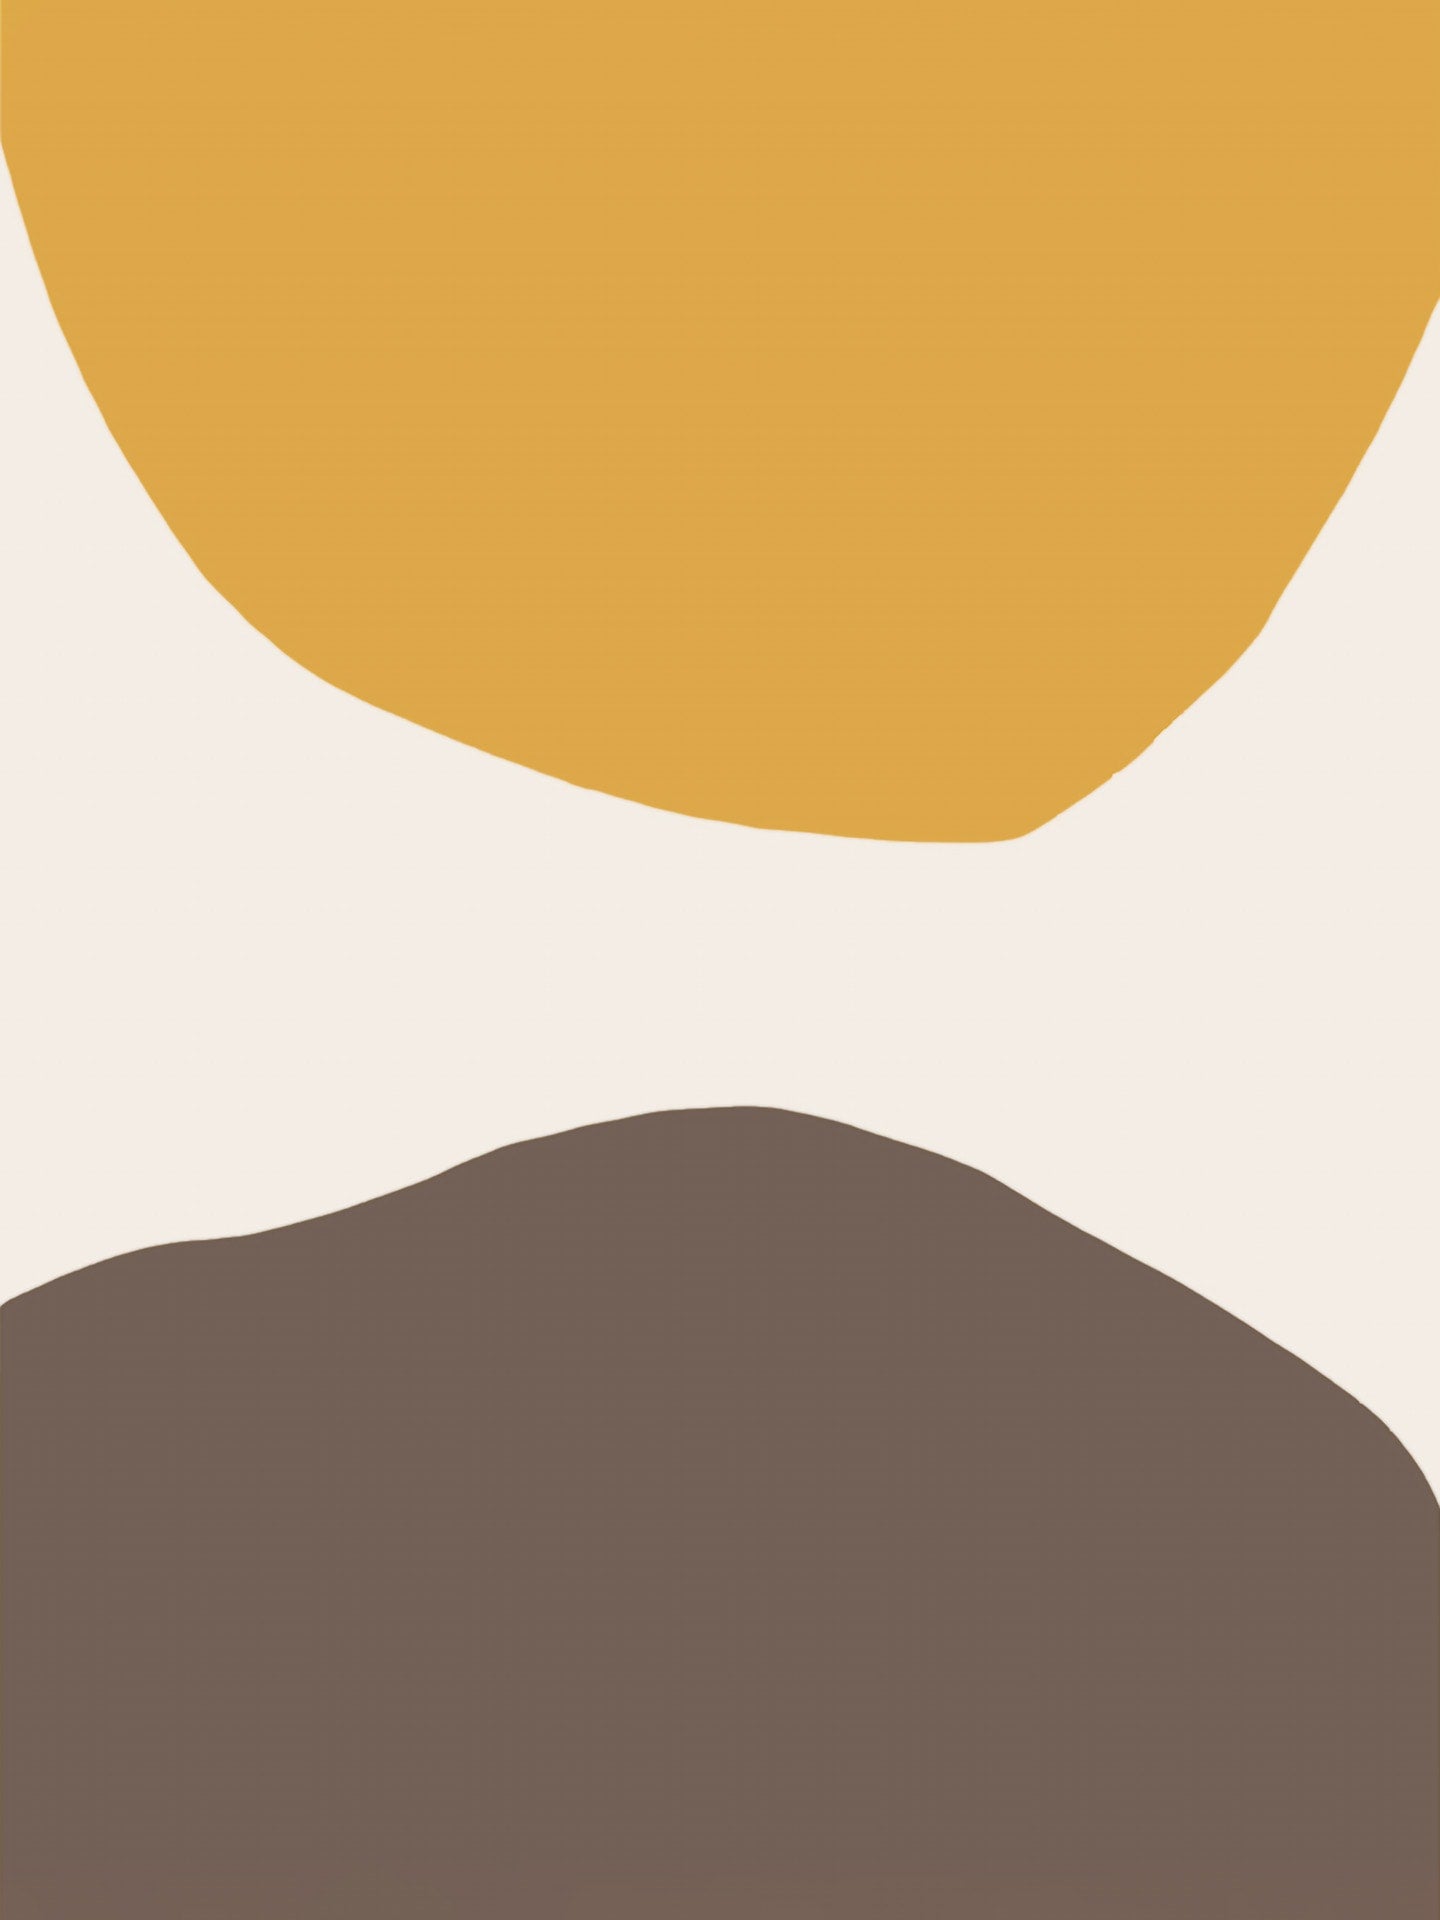 Abstract geometric shapes with earthy tones consisting of a large orange semicircle and a wavy brown shape against a cream background.